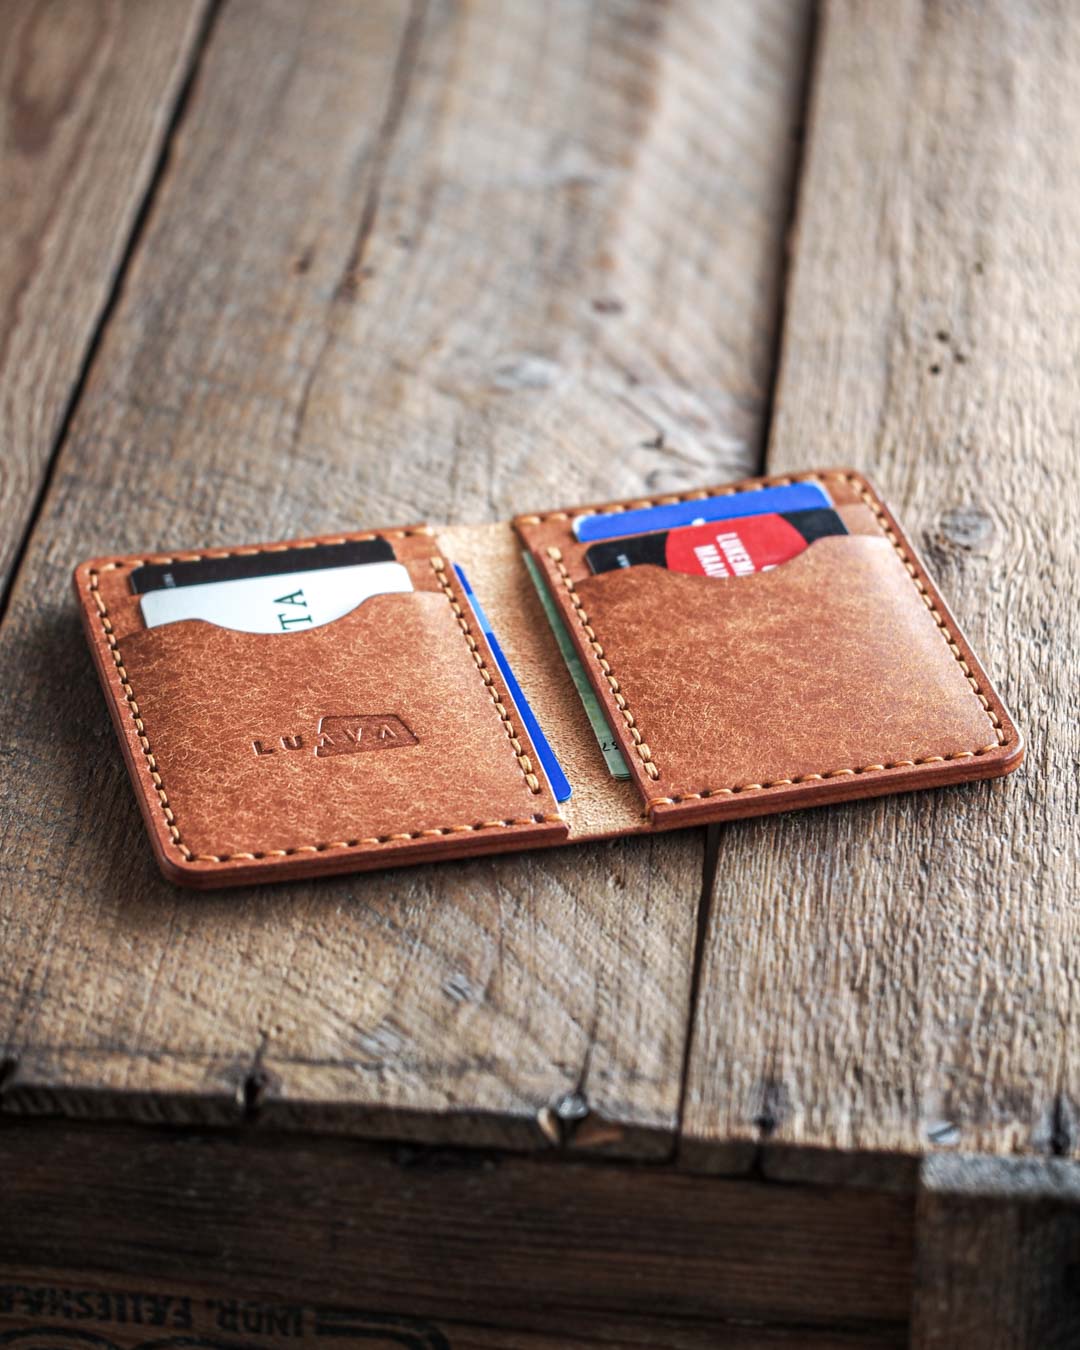 Luava handmade leather wallet ranch color cognac open in use